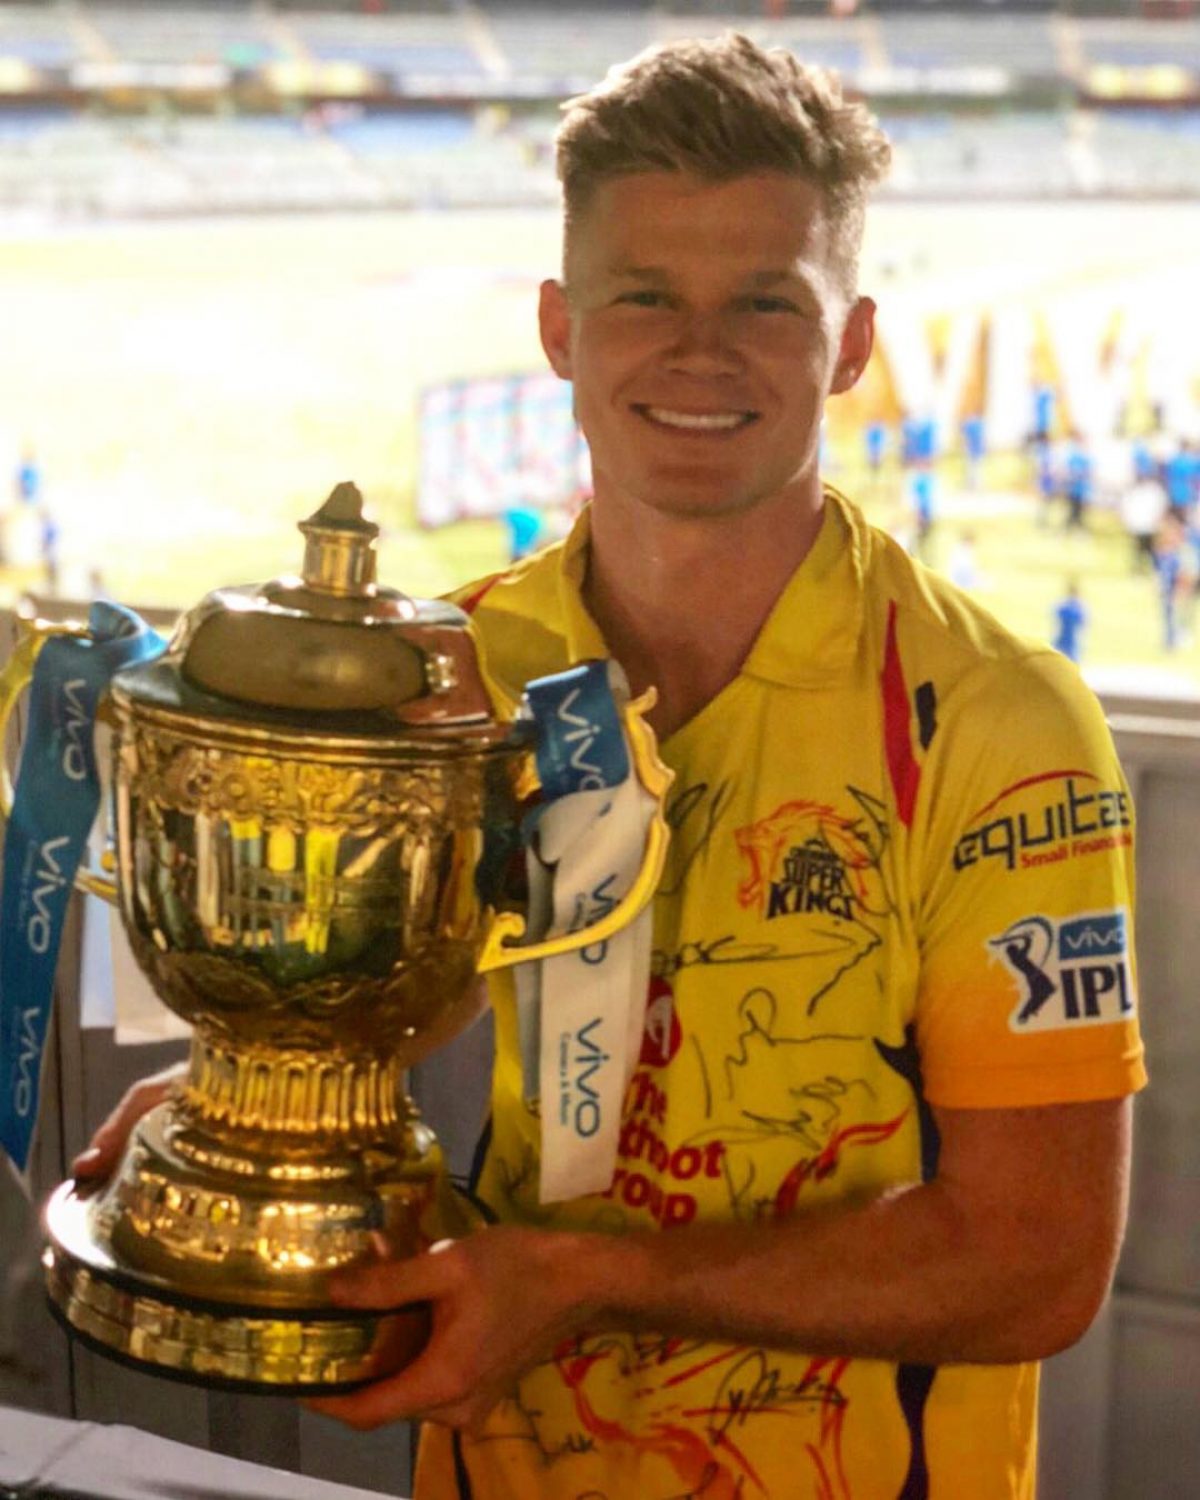 Sam Billings asks for dongle suggestions from fans